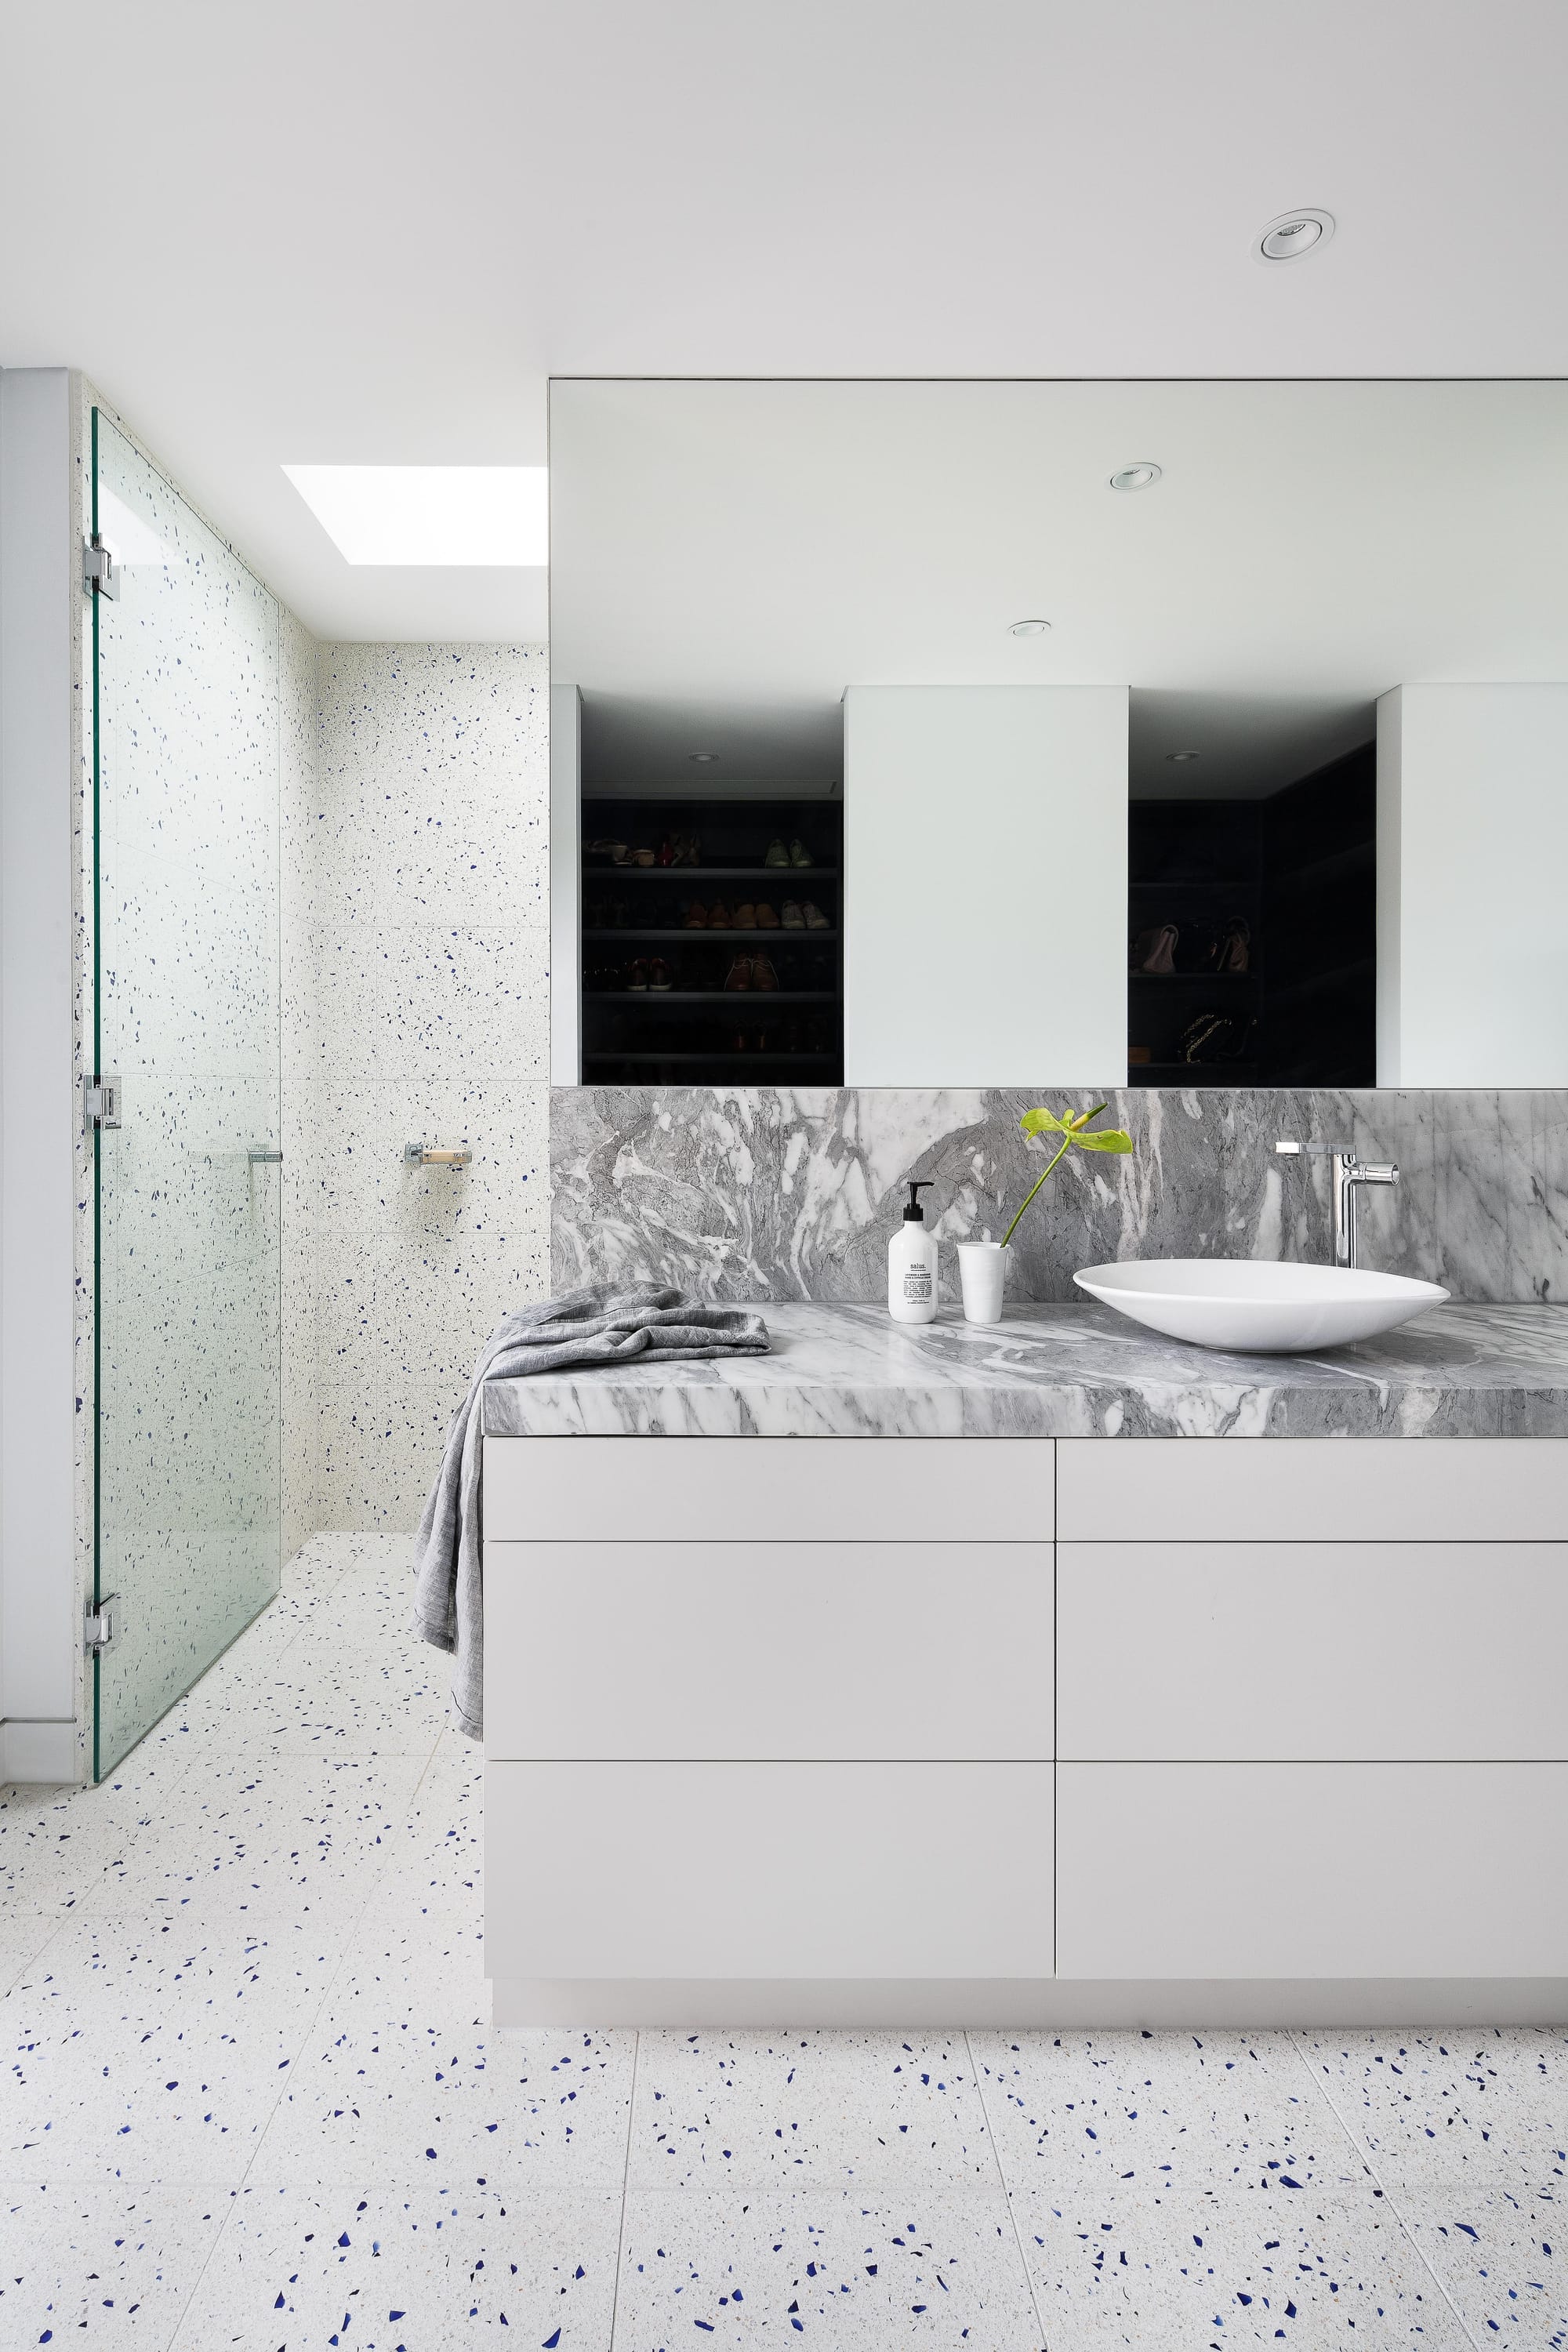 Cremorne House by Trethowan. Photography by Emily Bartlett. Residential bathroom with white cabinetry and grey marble benchtop. White and blue-specked tiles on floor and up walls.